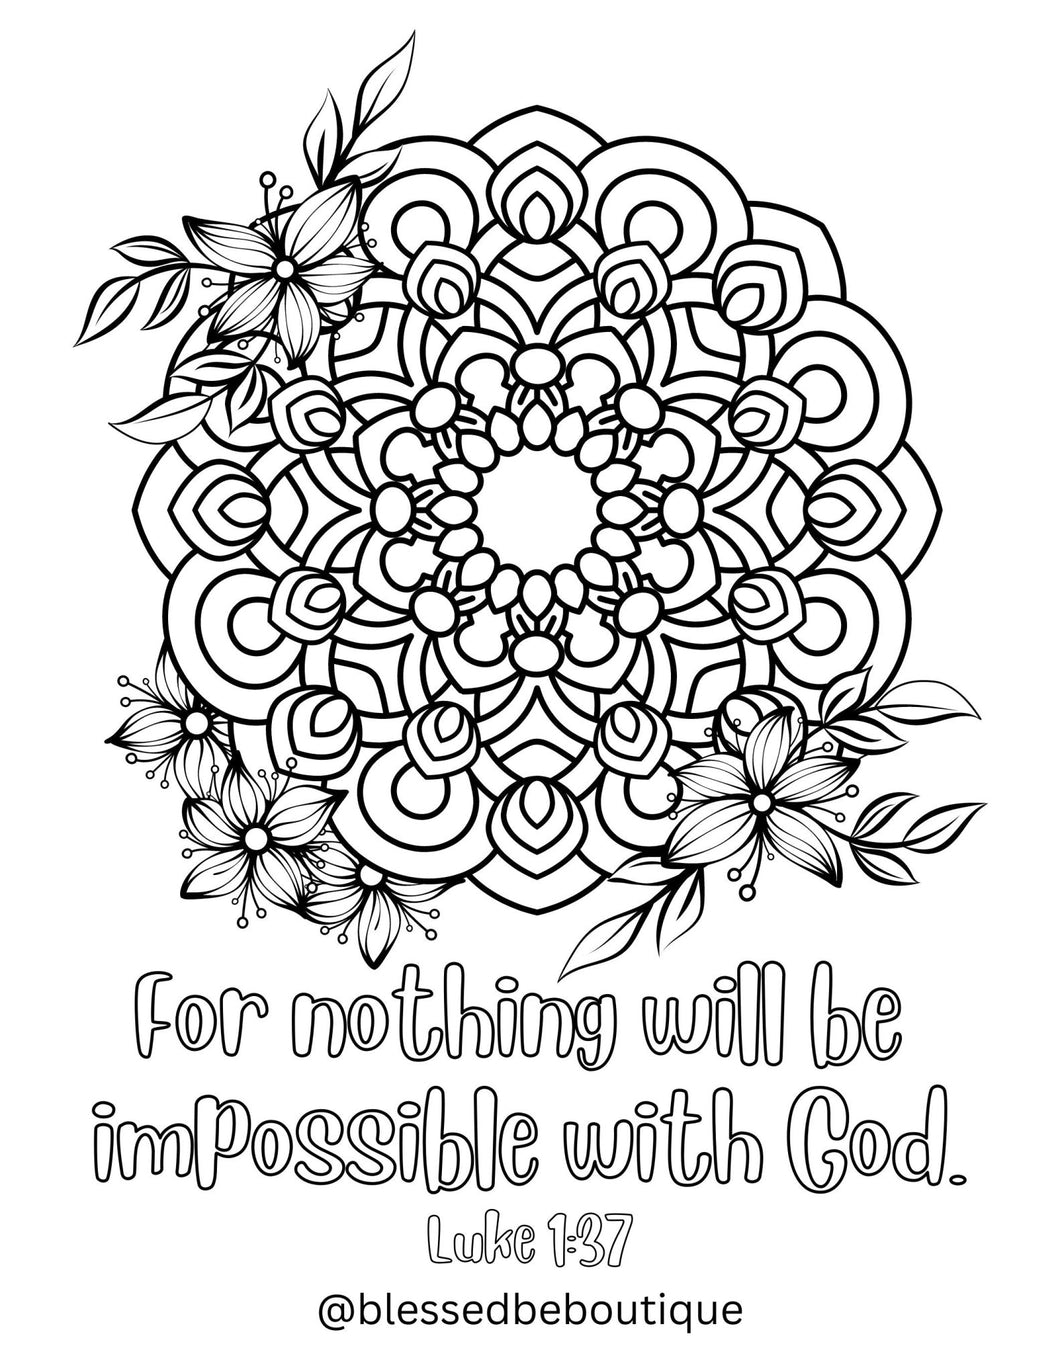 Nothing Will Be Impossible - Blessed Be Boutique